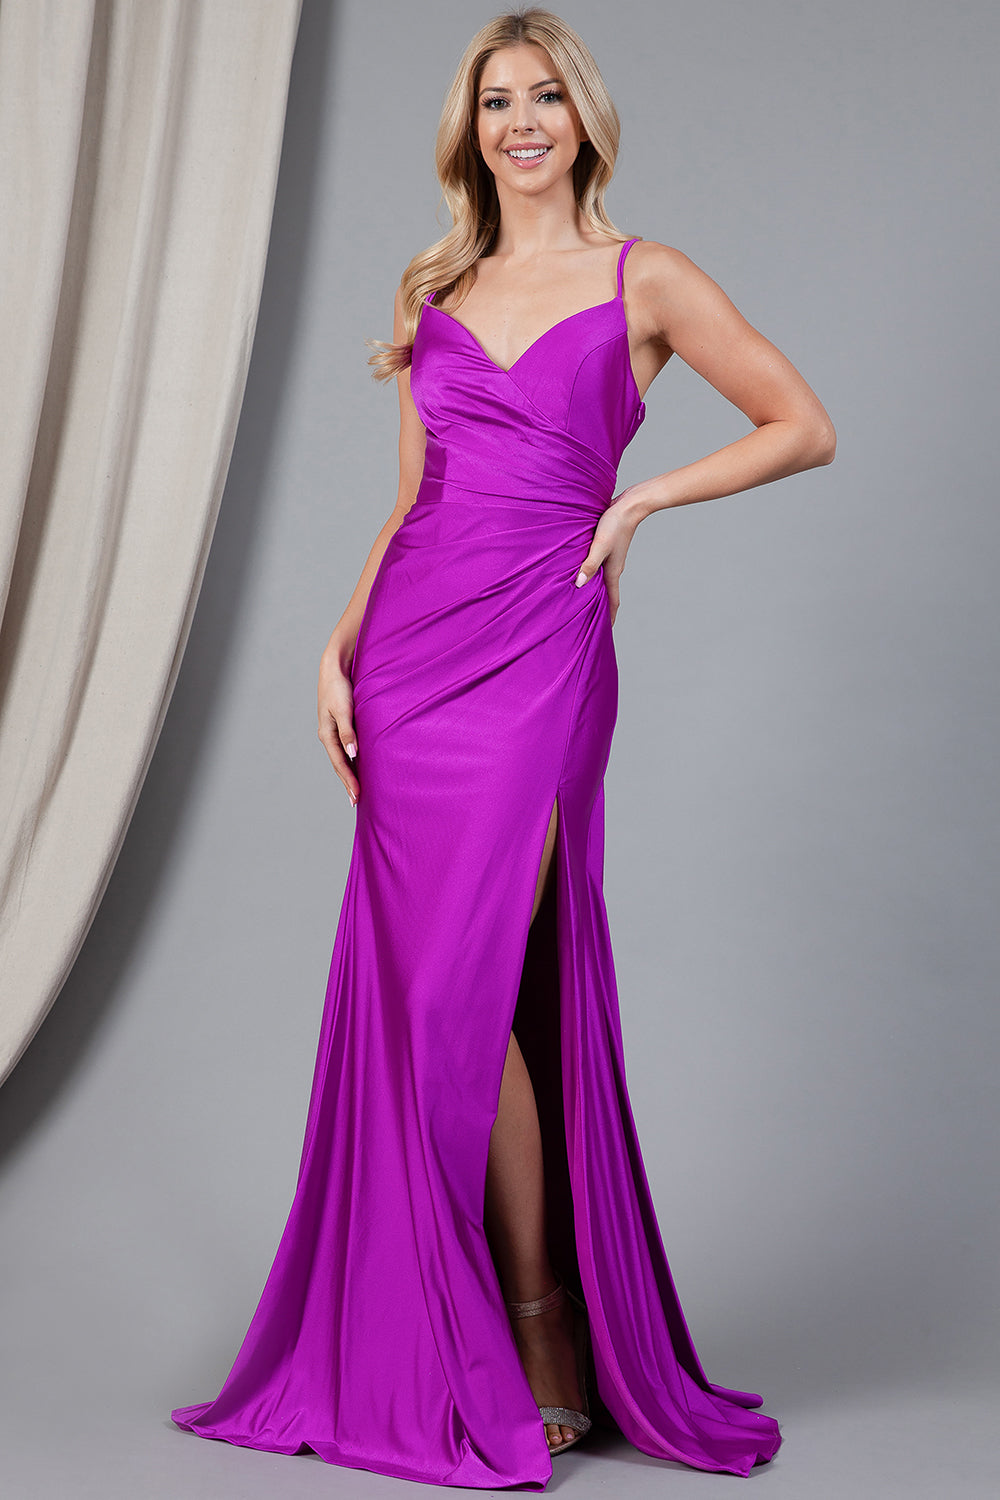 AC24-391 Fitted lycra maxi dress with a high slit, ruching side detail & zipper